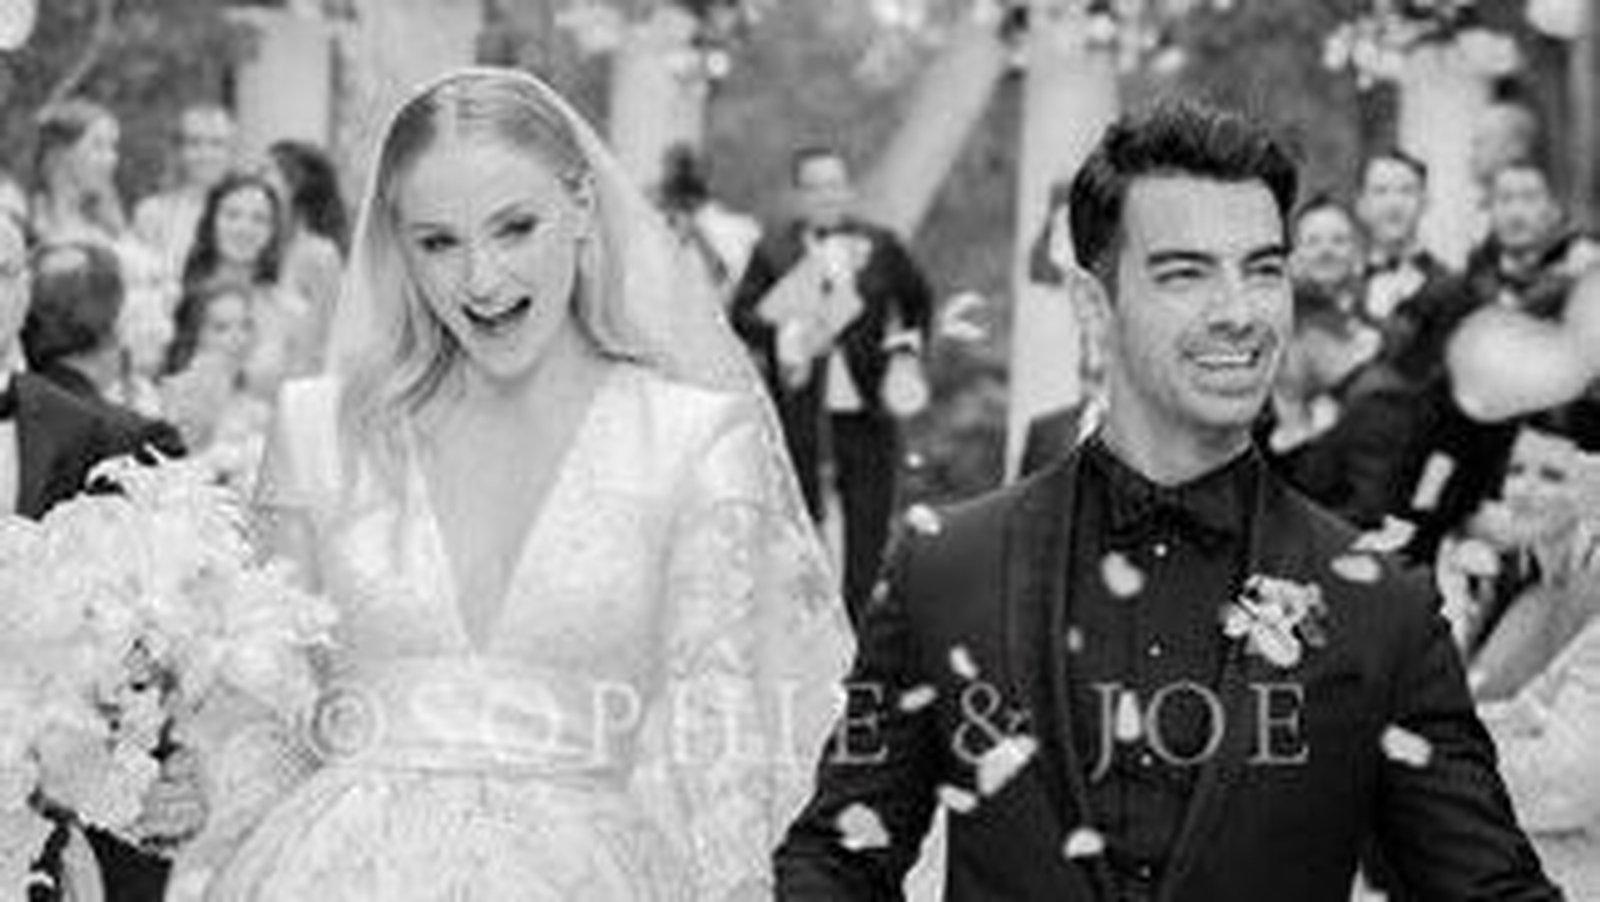 Sophie Turner's Louis Vuitton Wedding Dress Details Are Staggering